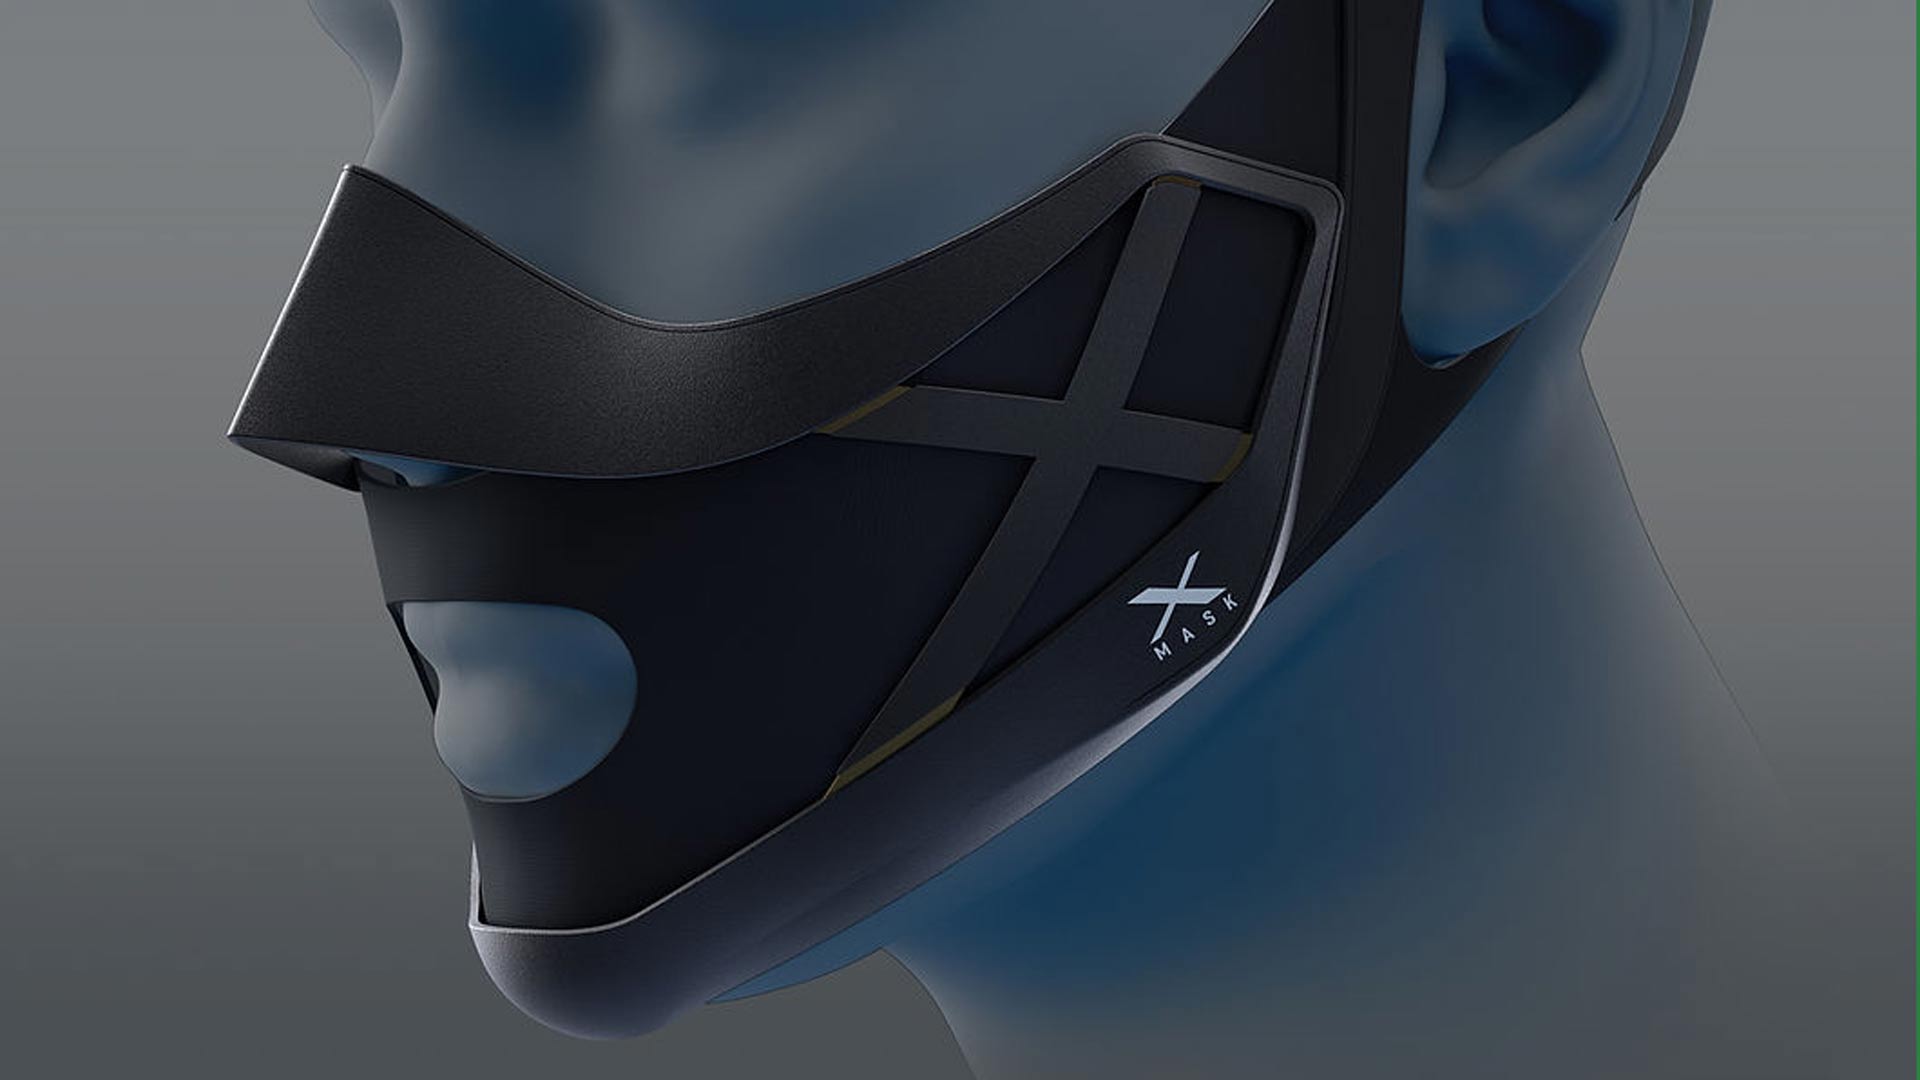 ‘X Mask’ Aims to Bring Face-tracking to Consumers in Unique Facemask Form Factor – Road to VR